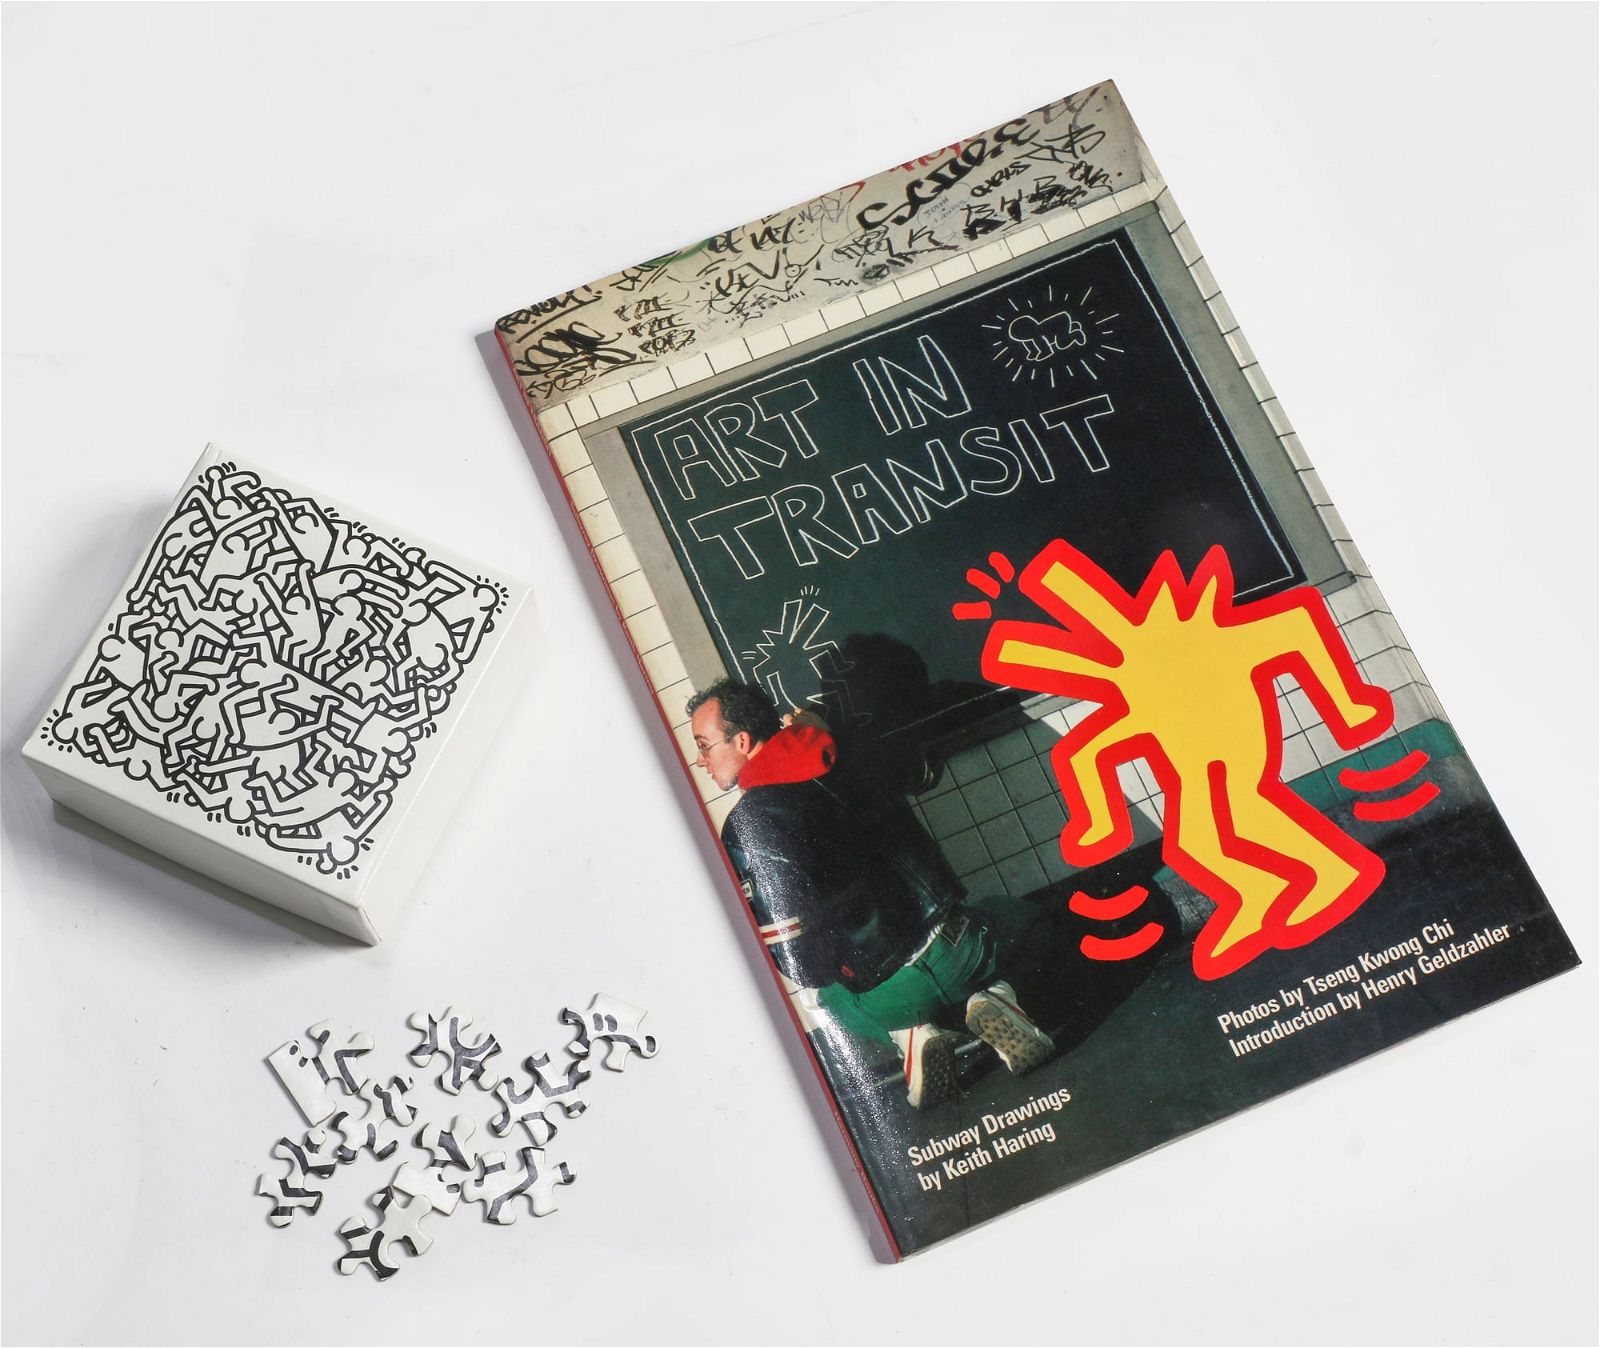 A KEITH HARING BOOK AND JIGSAW 2fb4235